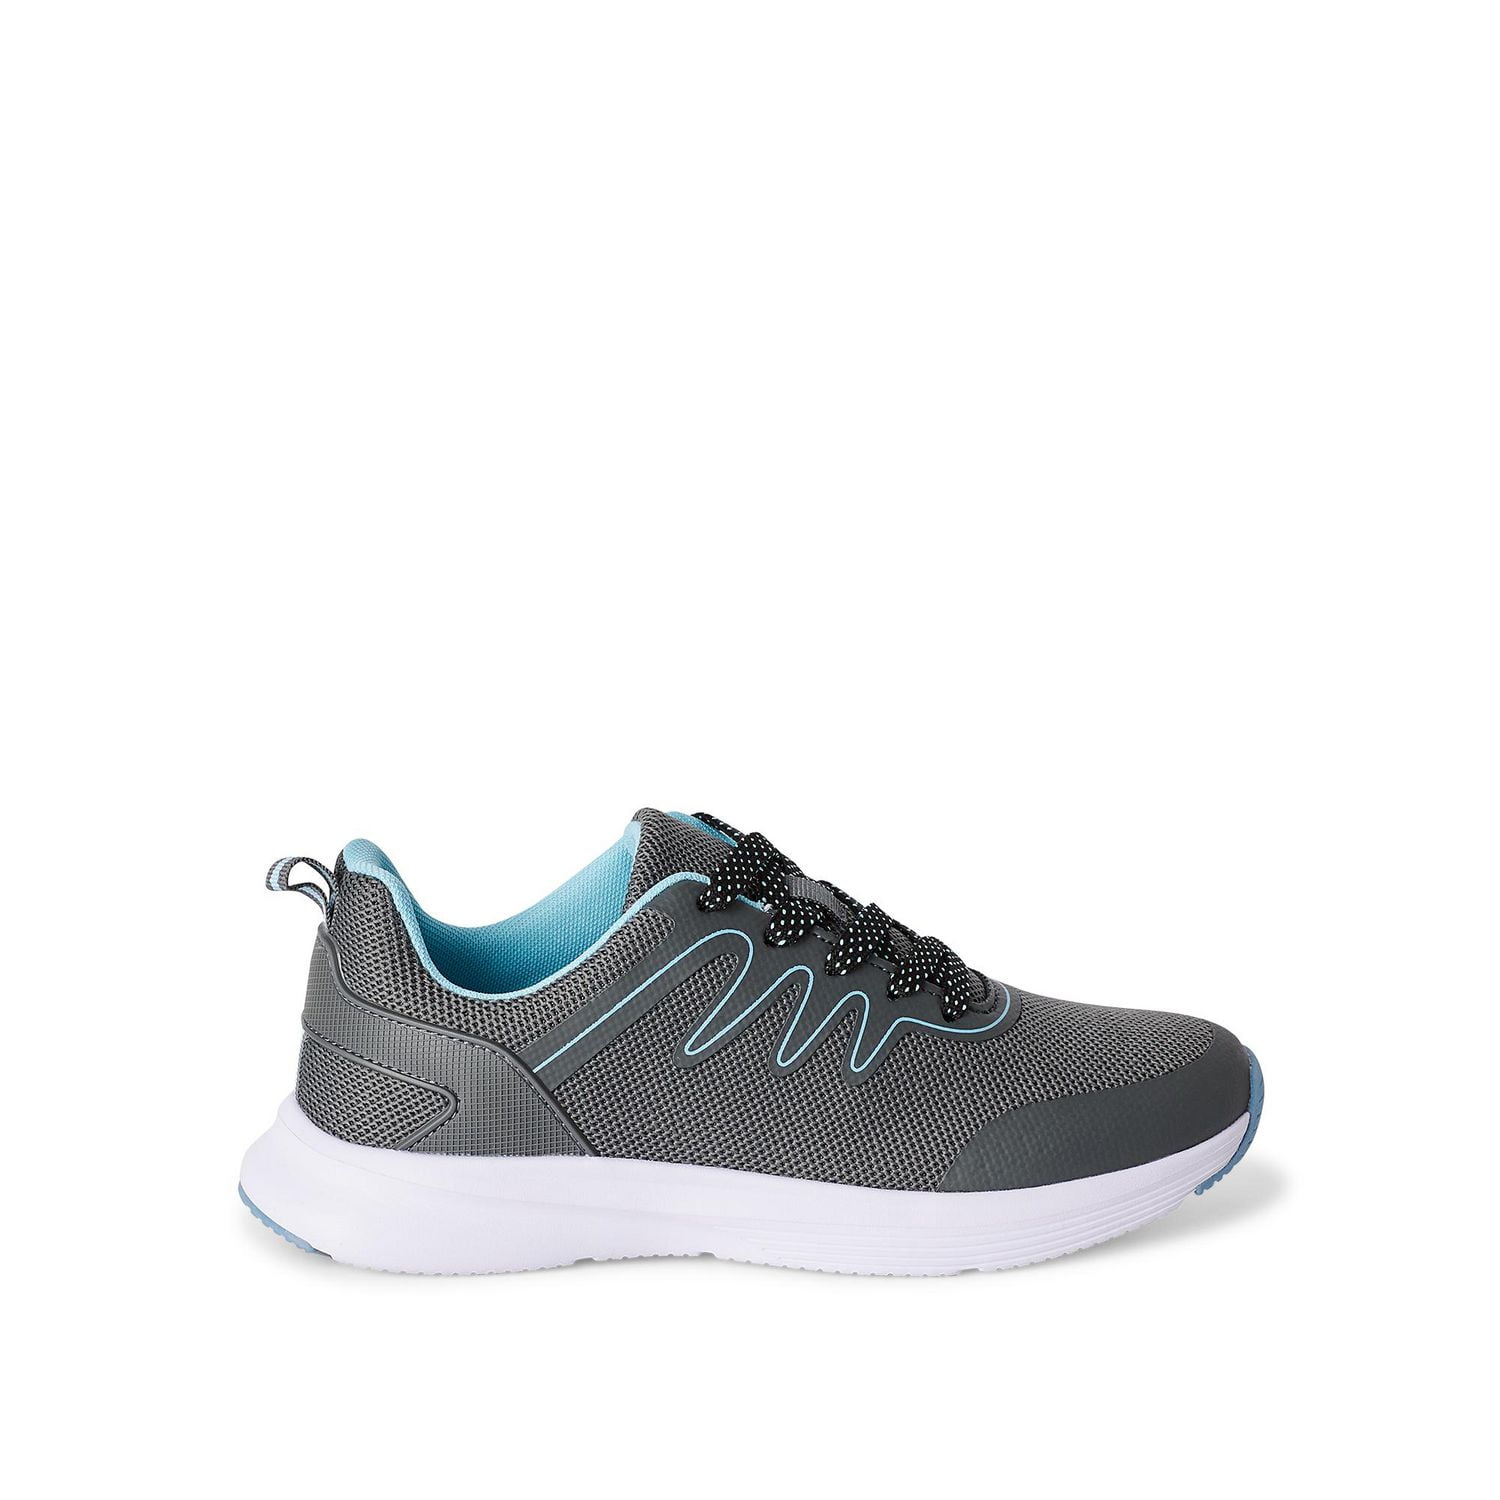 Athletic Works Women's Patty Sneakers, Sizes 6-10